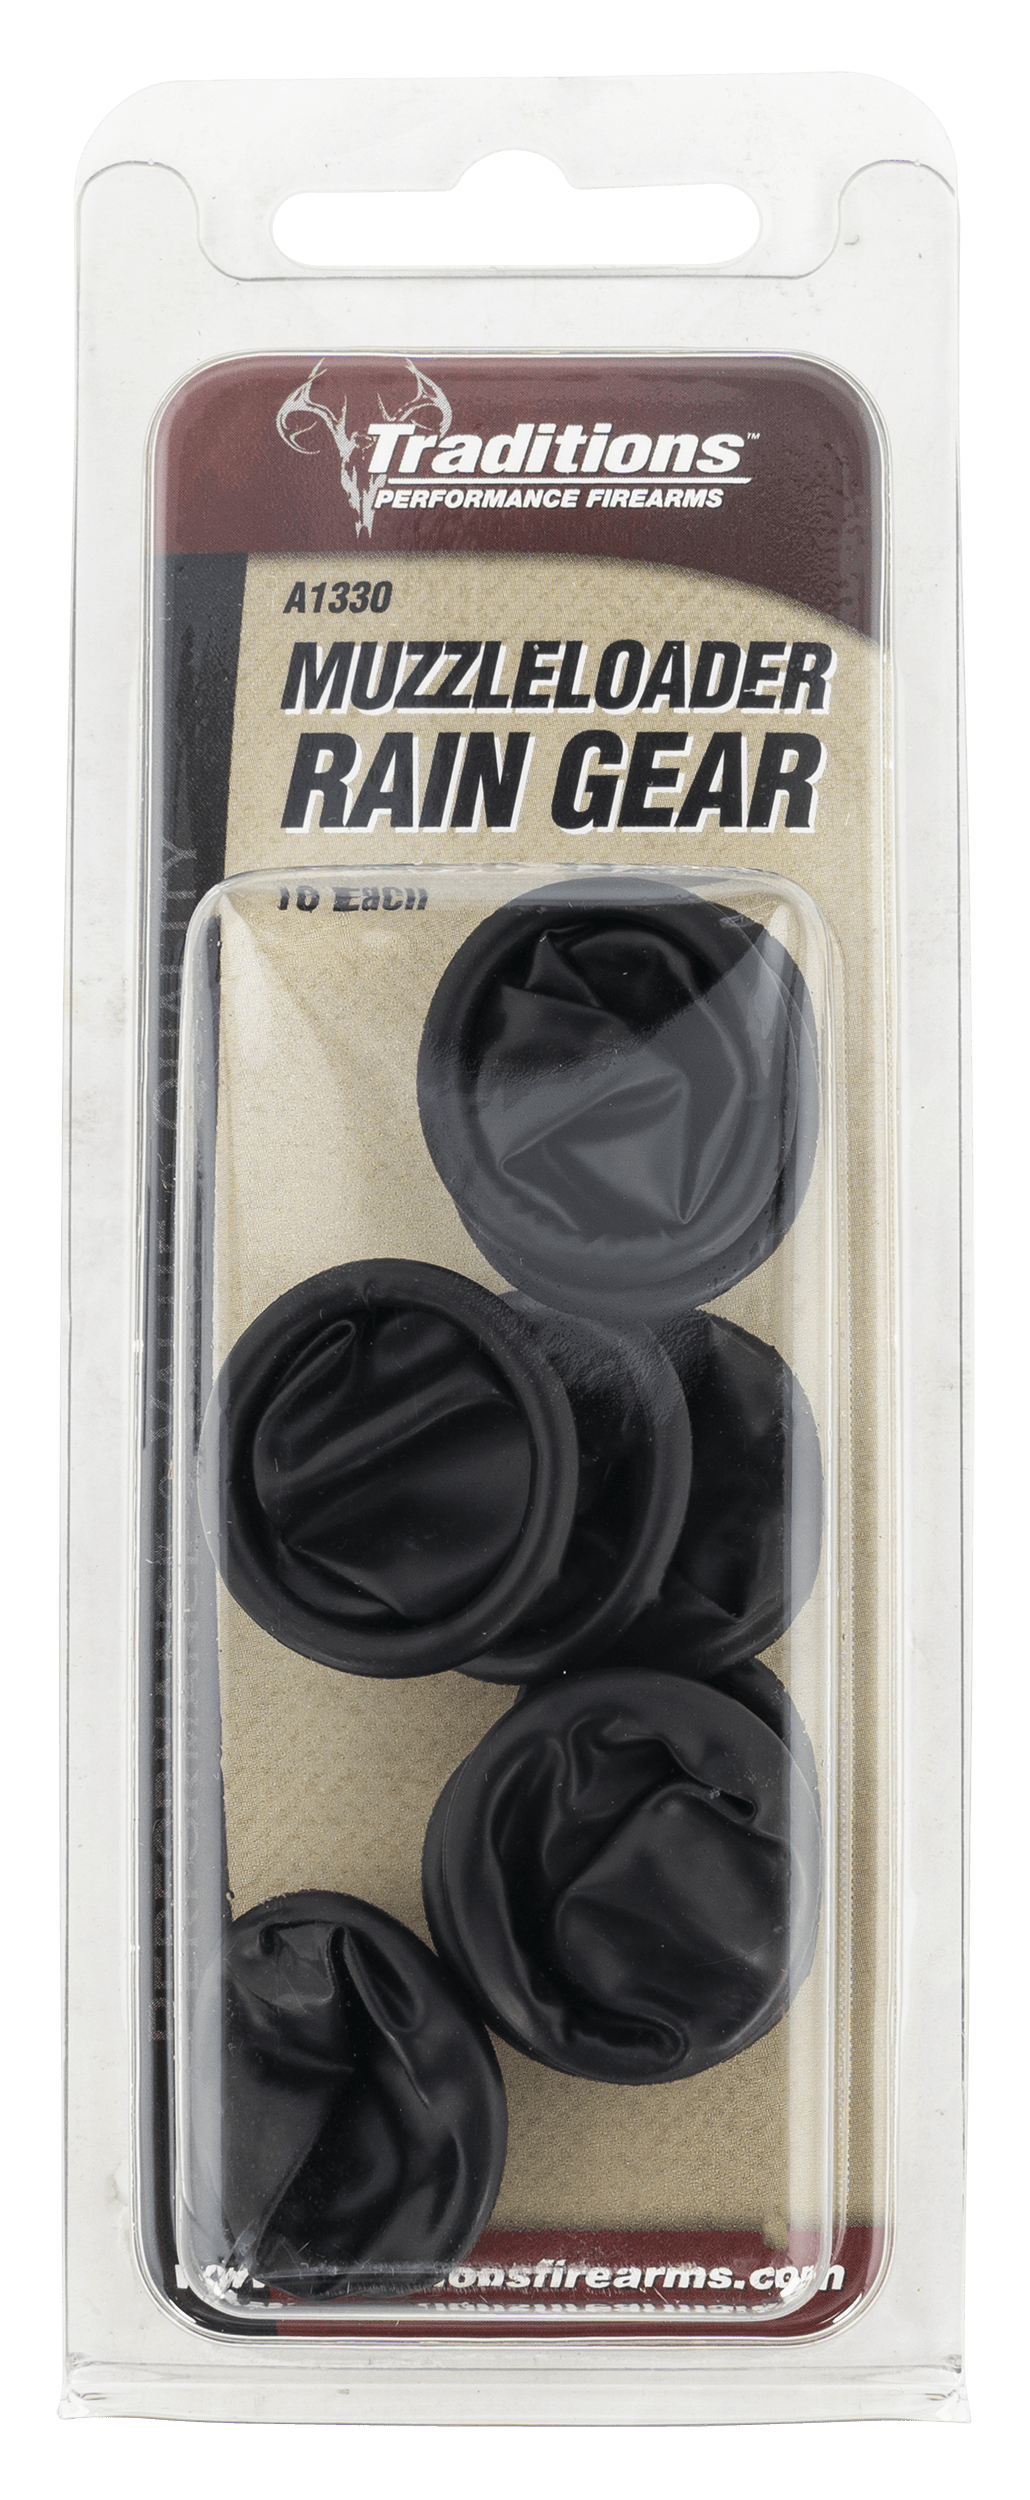 Traditions Traditions Muzzleloader, Trad A1330    Muzzleloading Rain Gear Muzzle Cover Muzzleloading